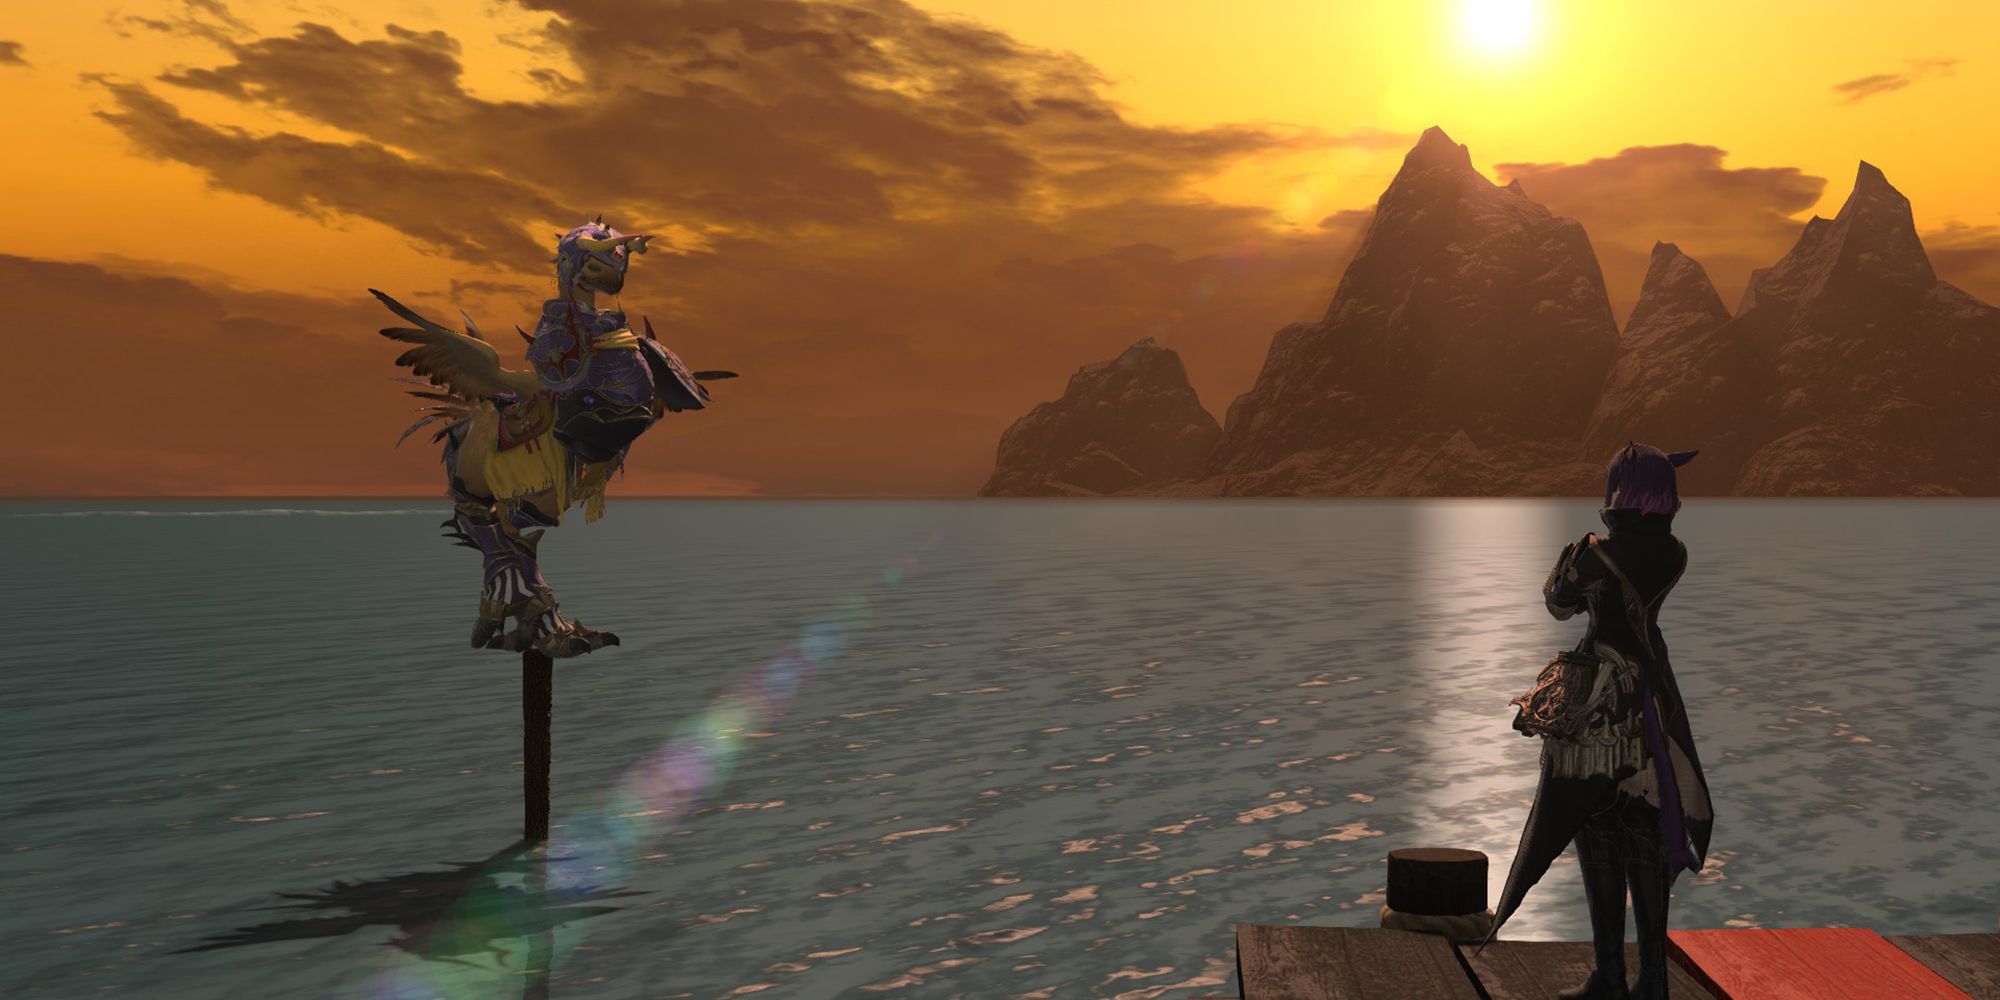 player character training chocobo companion over ocean at sunset